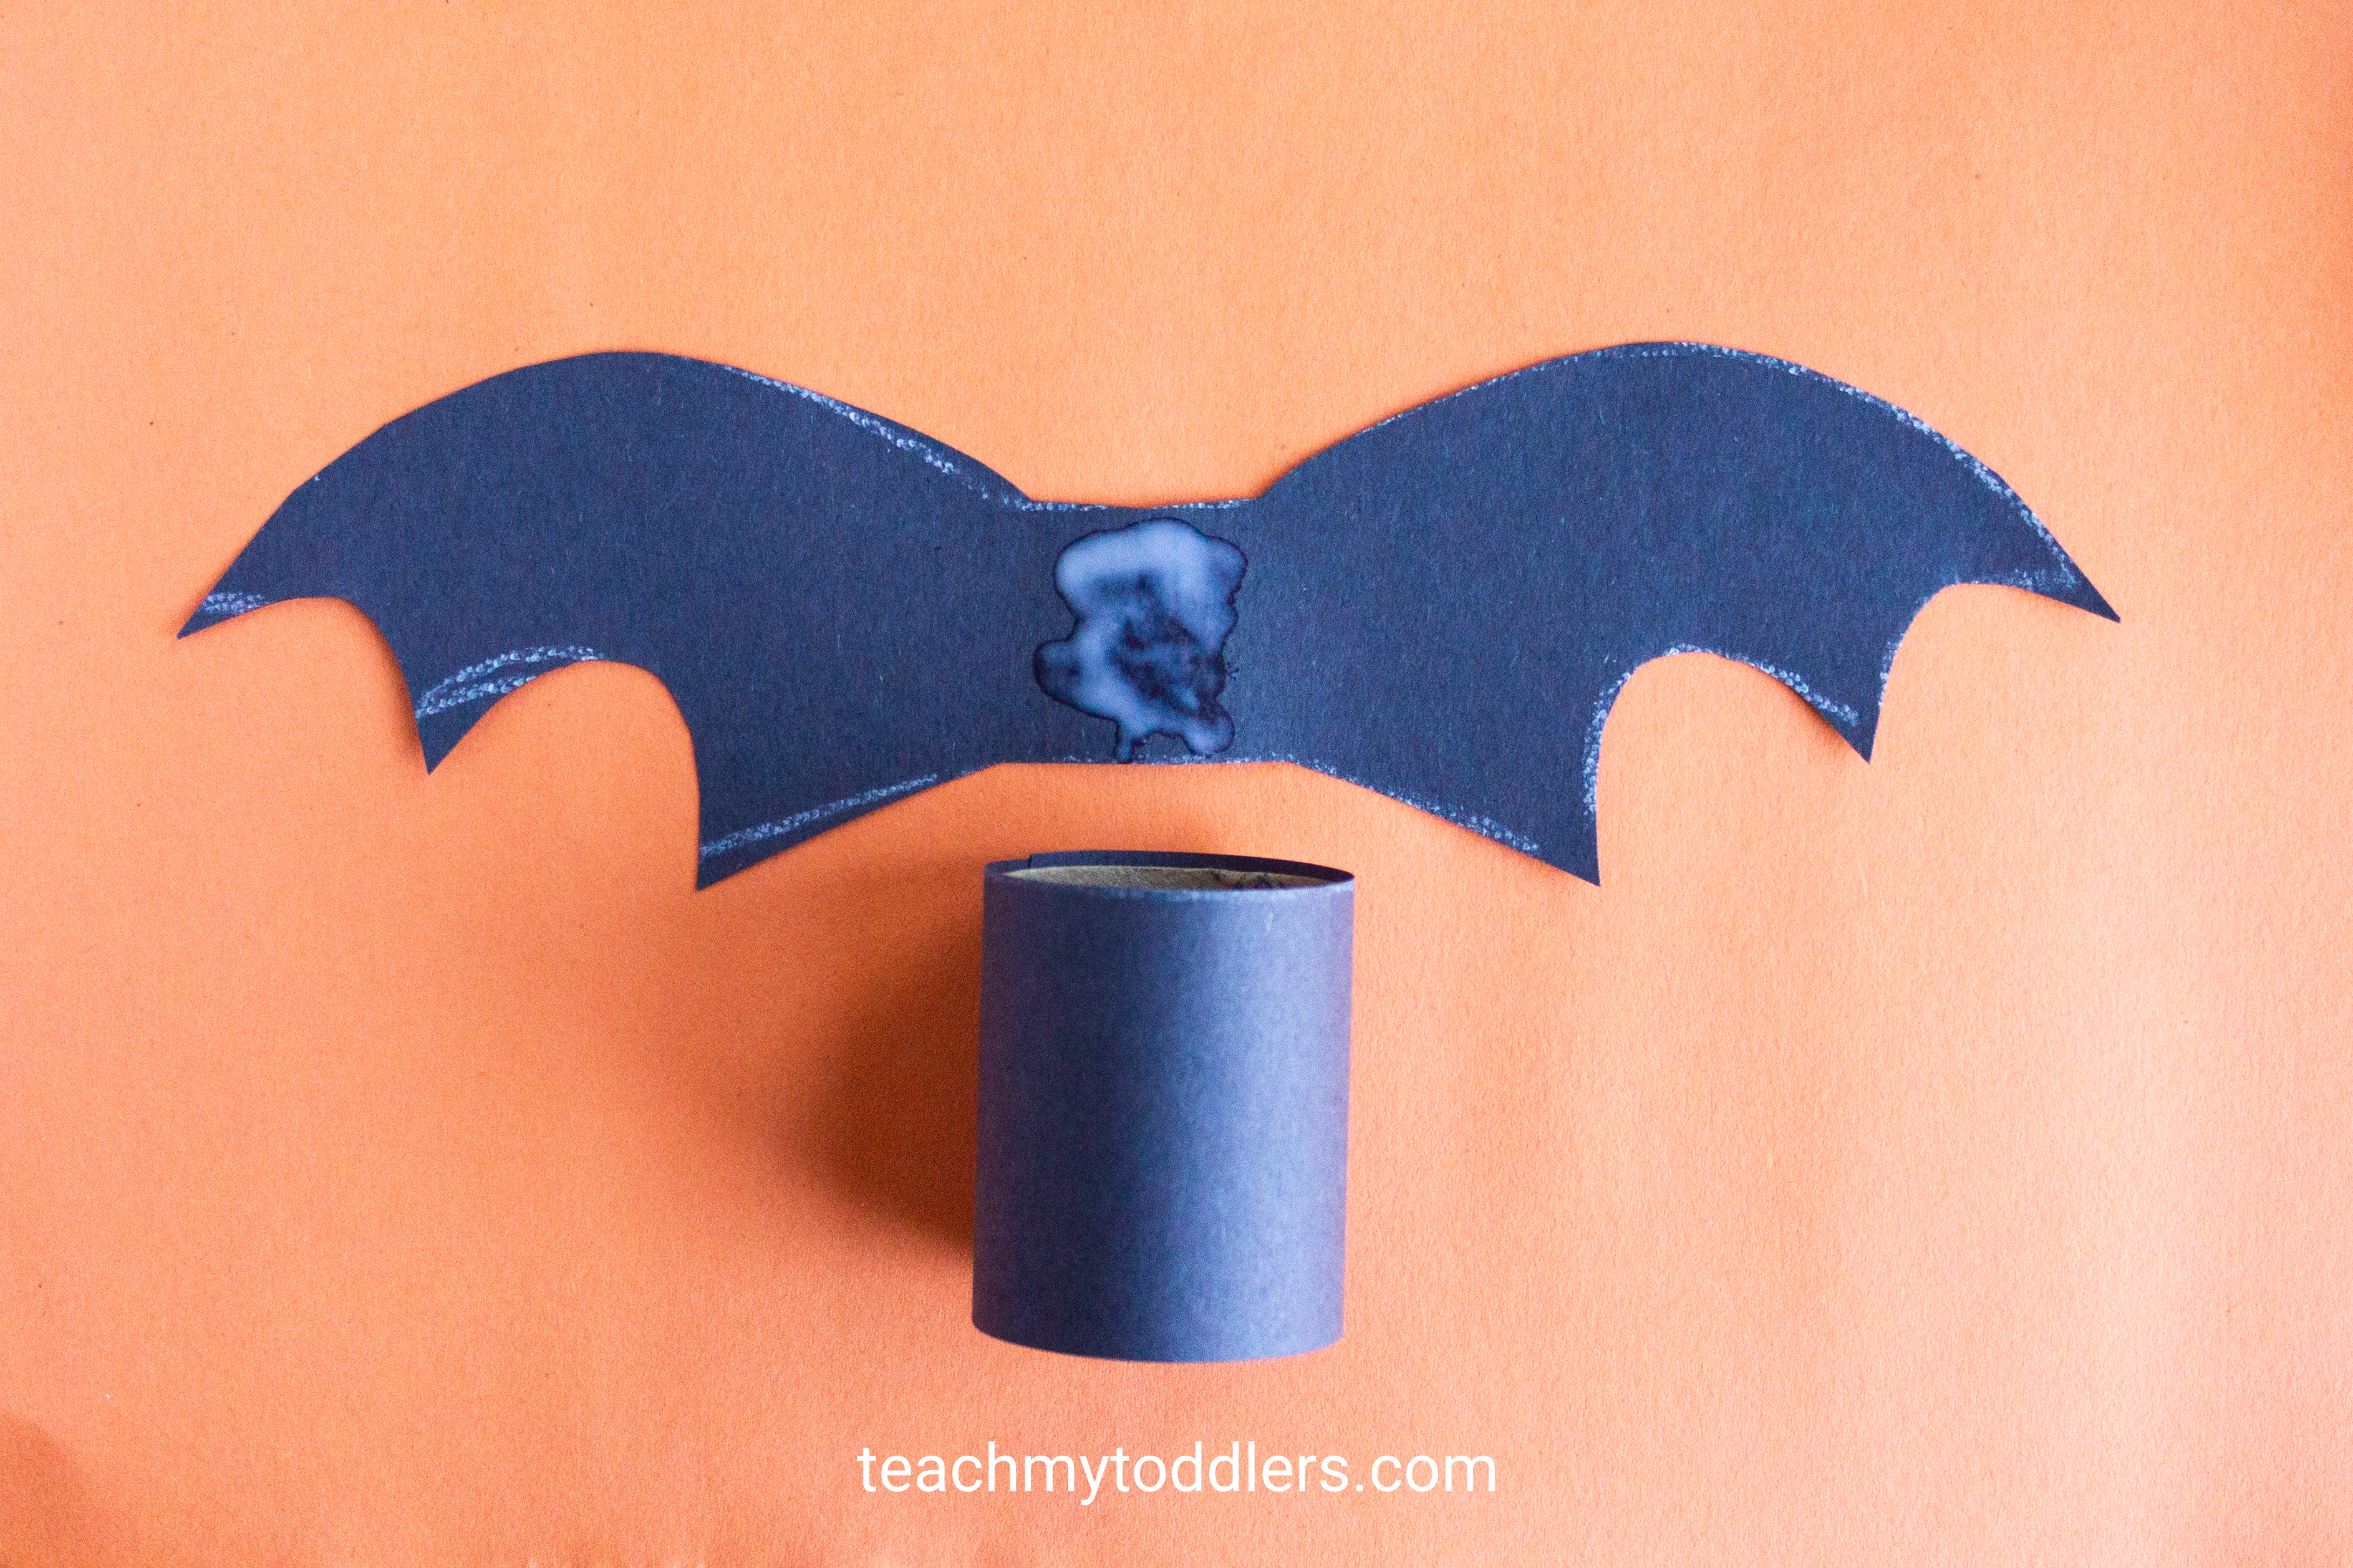 Discover how to make this paper bat craft for toddler's halloween activity